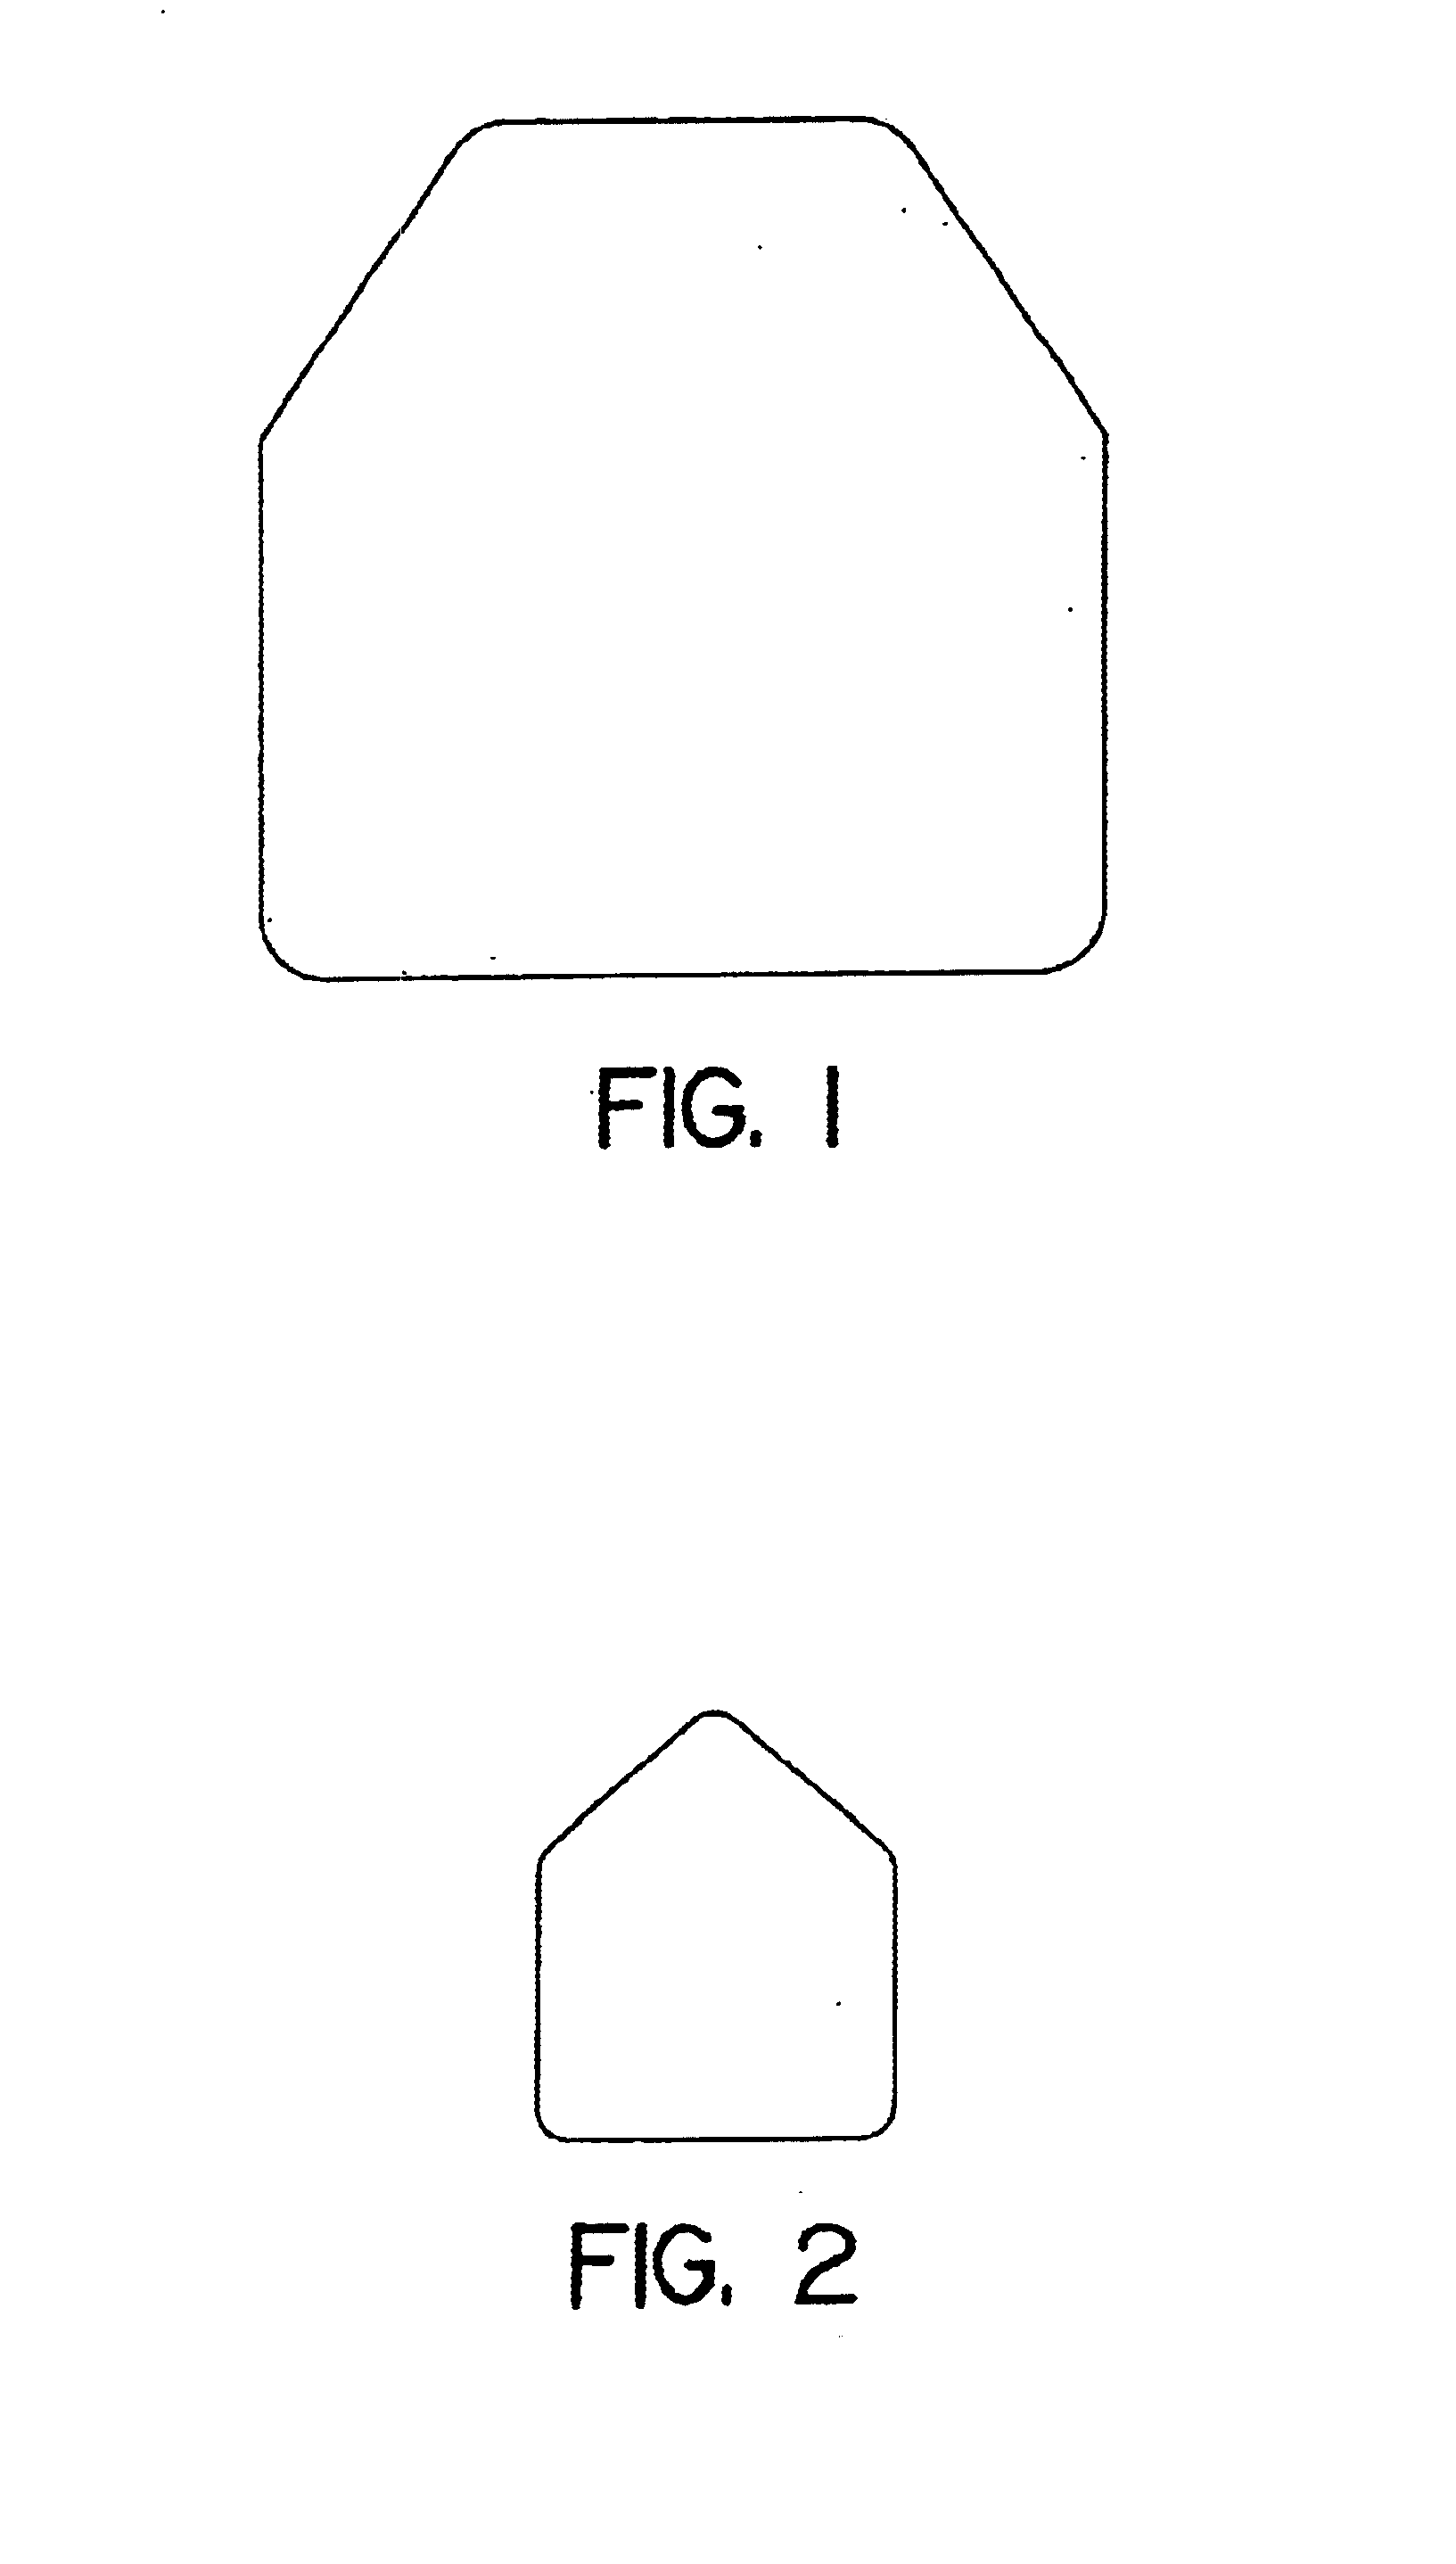 Ceramic-rich composite armor, and methods for making same